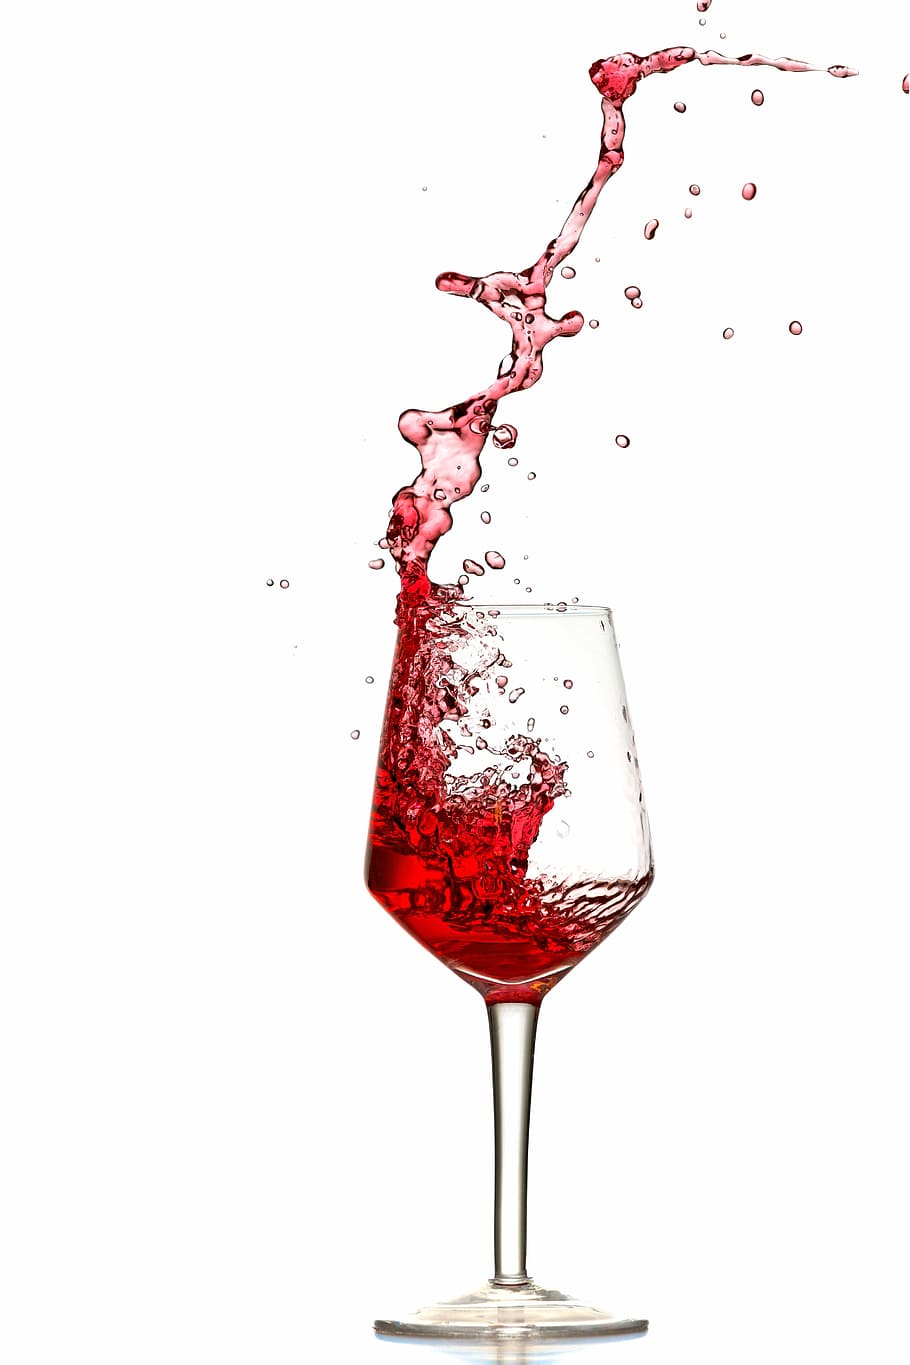 Hd Wallpaper Pouring Of Red Wine In Clear Long Stem Wine Glass Splash